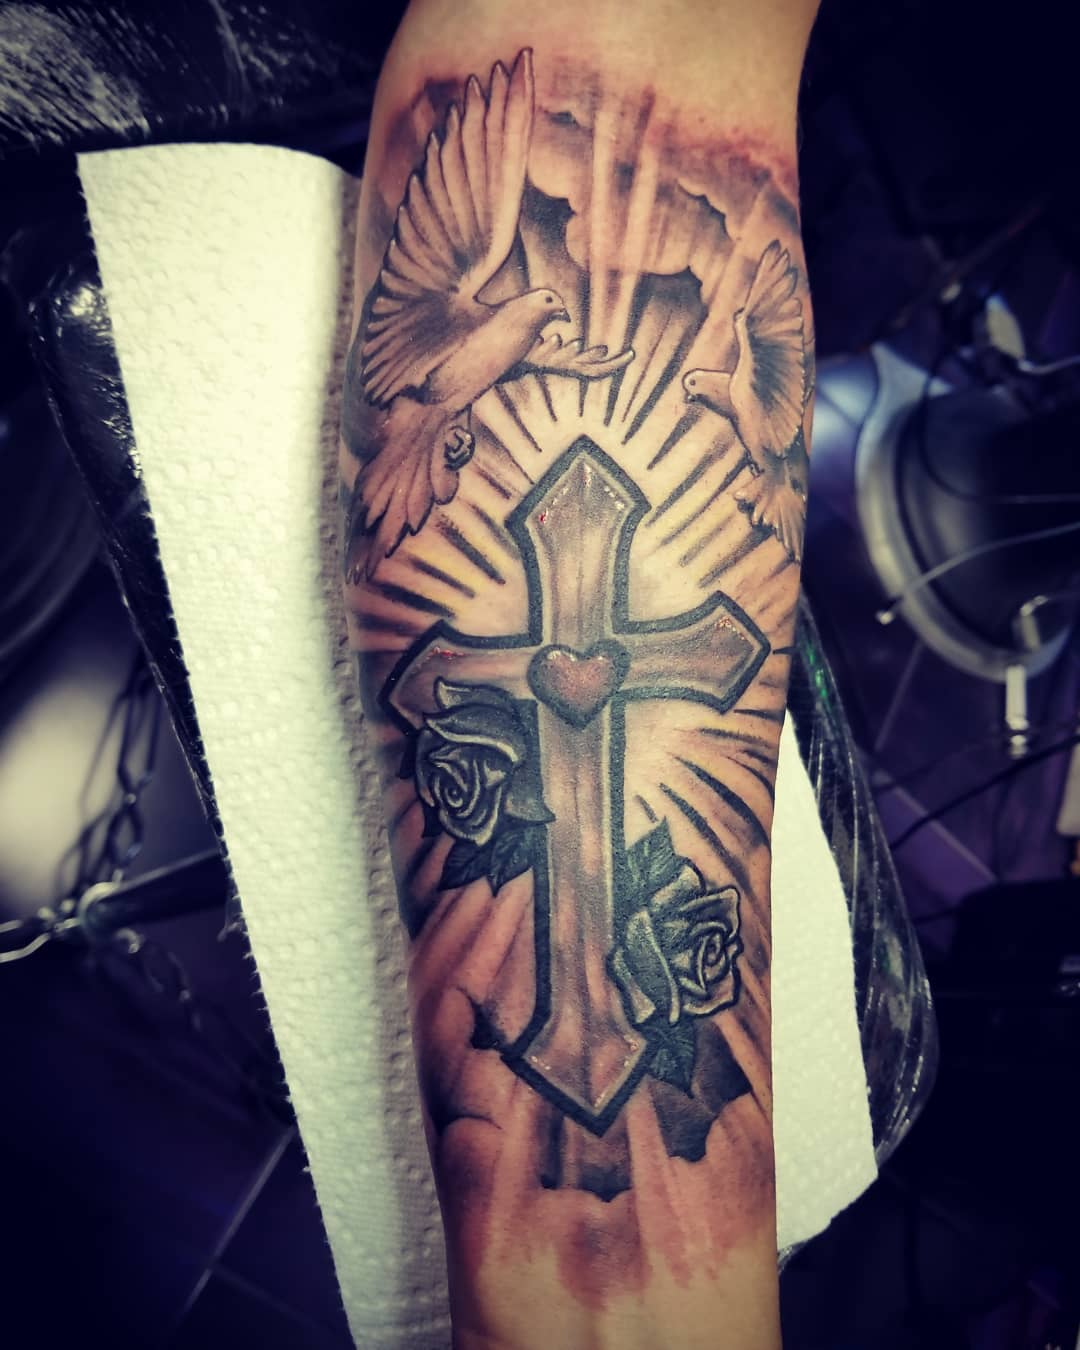 125 Best Cross Tattoos You Can Try Meanings Wild Tattoo Art regarding dimensions 1080 X 1350